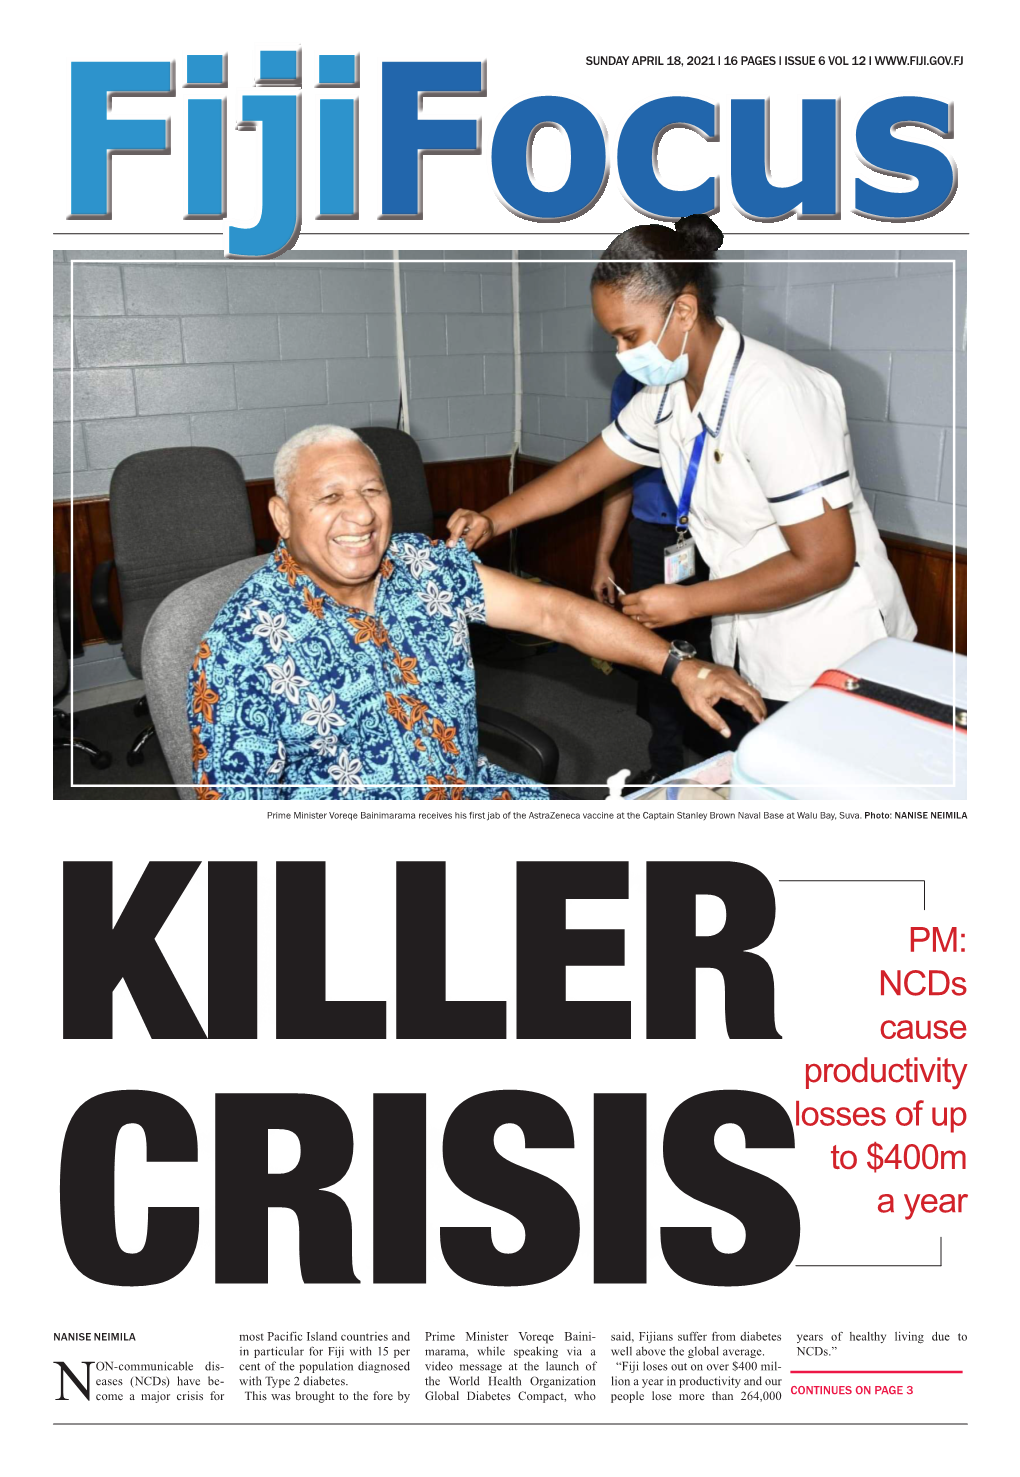 Ncds Cause Productivity Losses of up to $400Ma Year